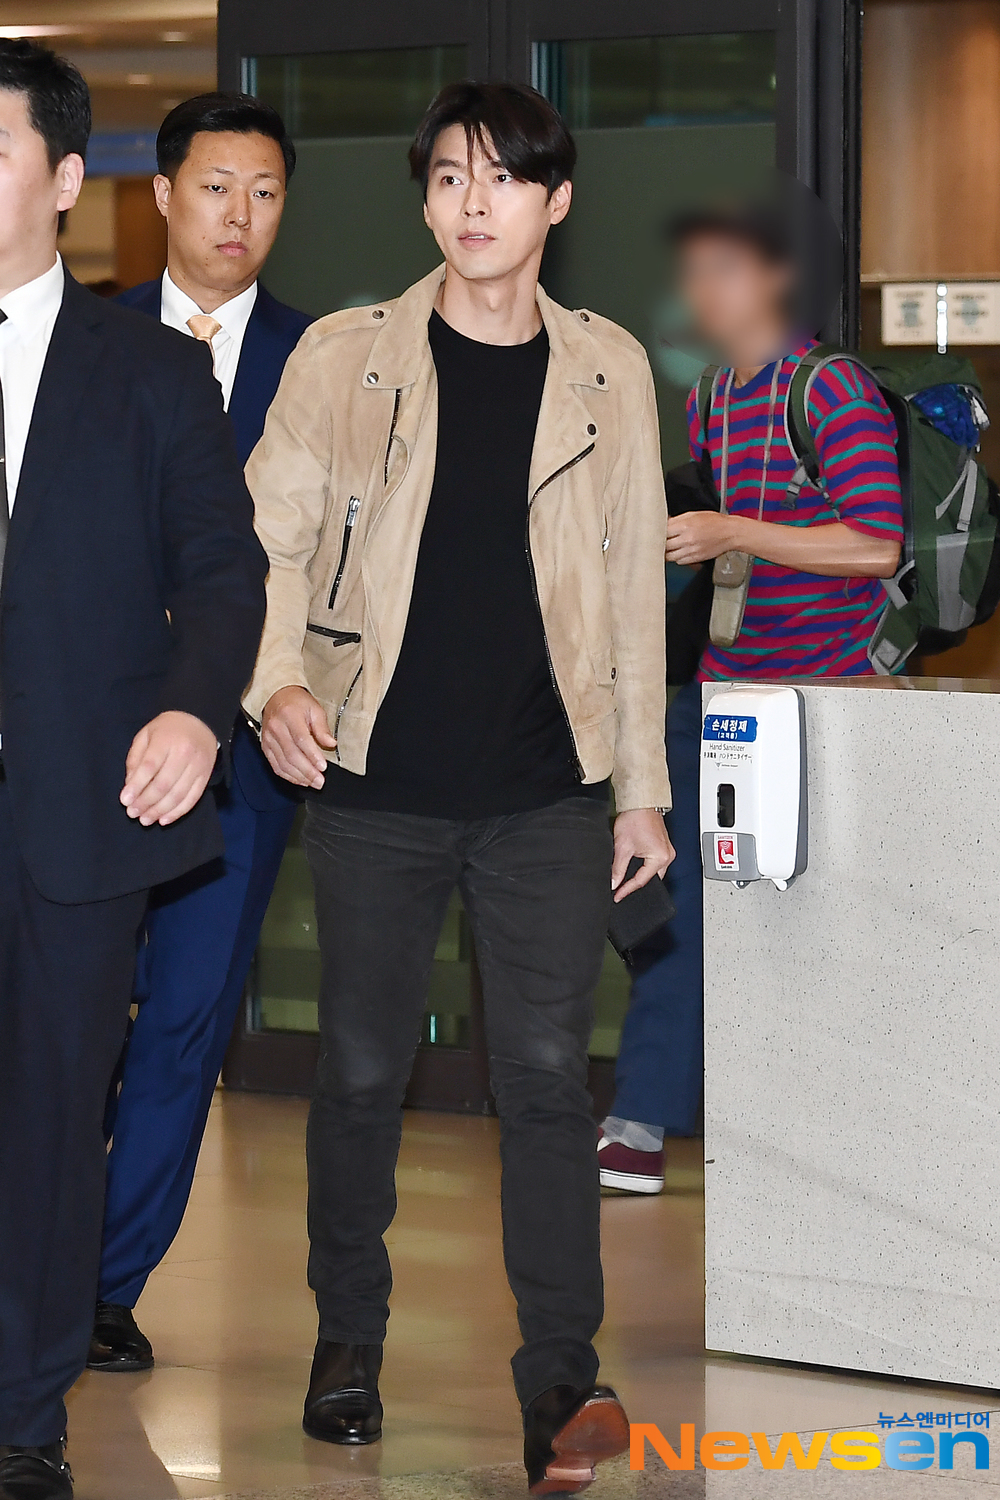 Actor Hyun Bin arrived at Incheon International Airport in Unseo-dong, Jung-gu, Incheon on the afternoon of April 21 after completing the LOG INTO THE SPACE -2019 Hyun Bin Fan Meeting Tour - in Taipei.Actor Hyun Bin is entering the country with an airport fashion.exponential earthquake